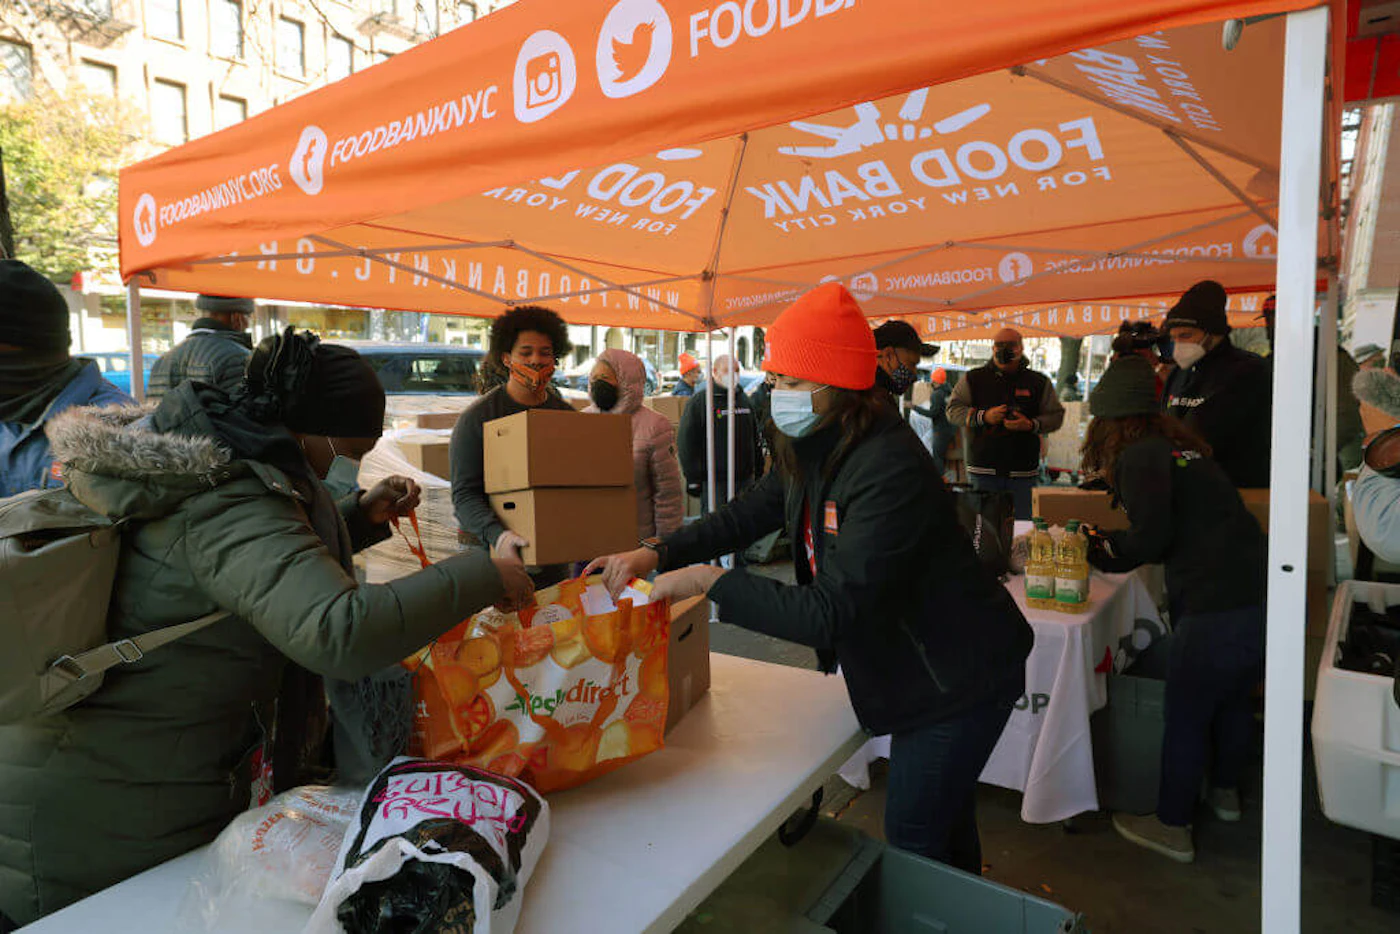 Volunteers help to give food away during a Thanksgiving food distribution event at Food Bank For New York City in the Harlem neighborhood on November 16, 2020 in New York City. Food Bank For New York City partnered with Stop & Shop and WBLS' The Steve Harvey Morning Show to give away turkeys, holiday boxes, and fresh produce to families in Harlem for Thanksgiving. (Photo by Michael M. Santiago/Getty Images)